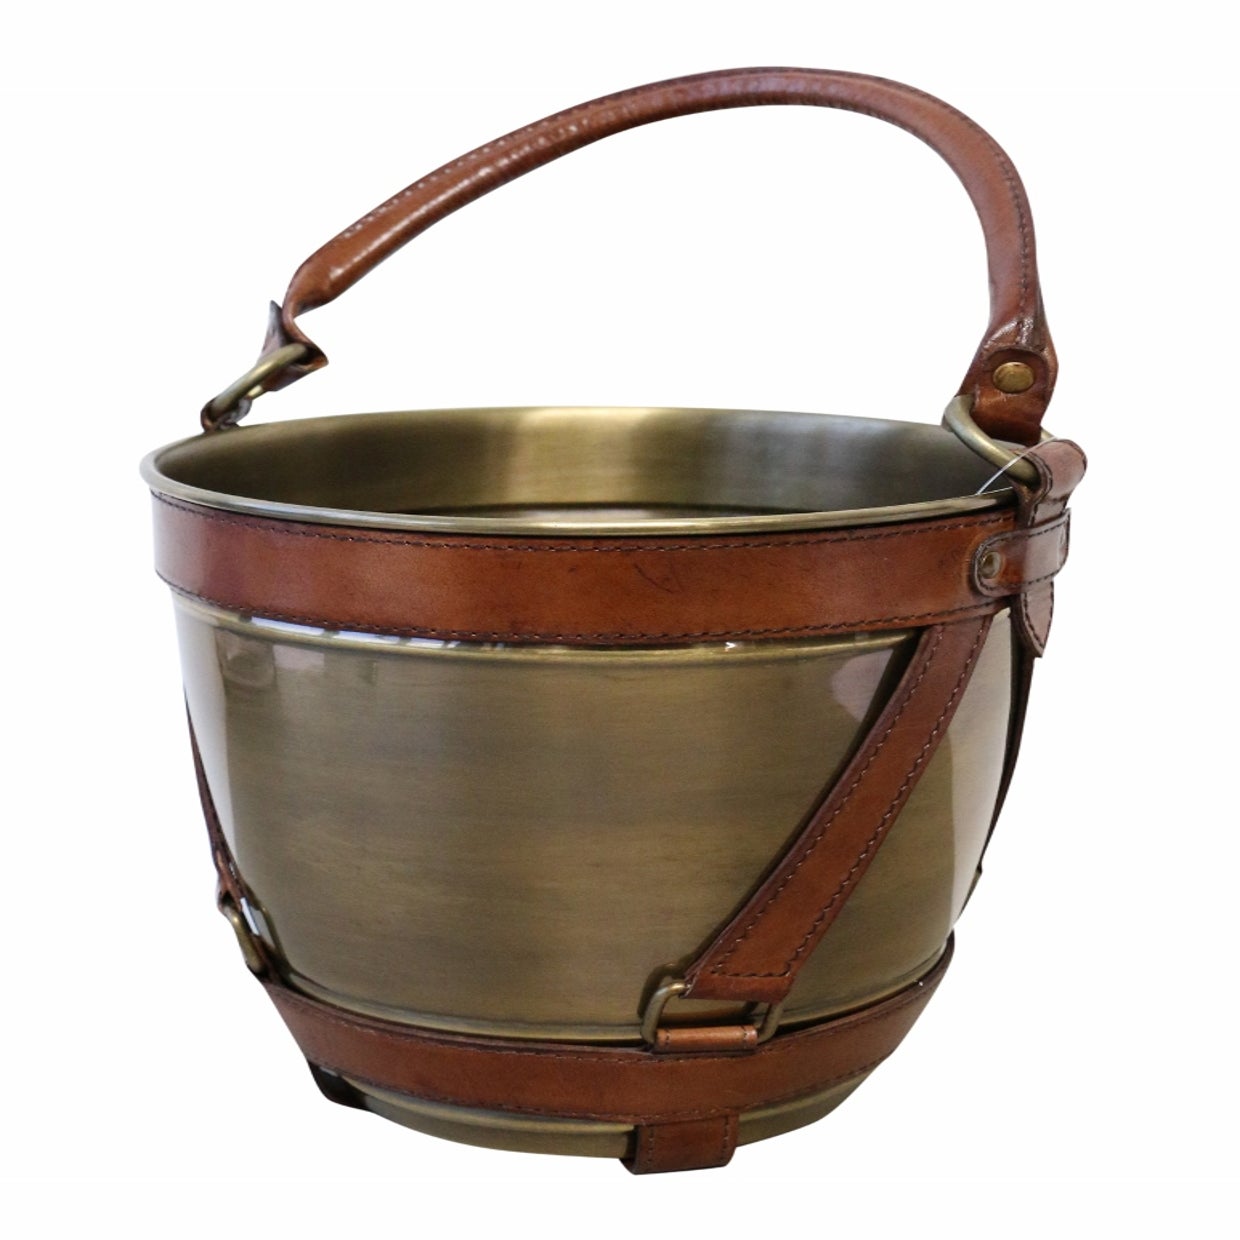 RIVIERA BRASS WINE COOLER WITH LEATHER HANDLE